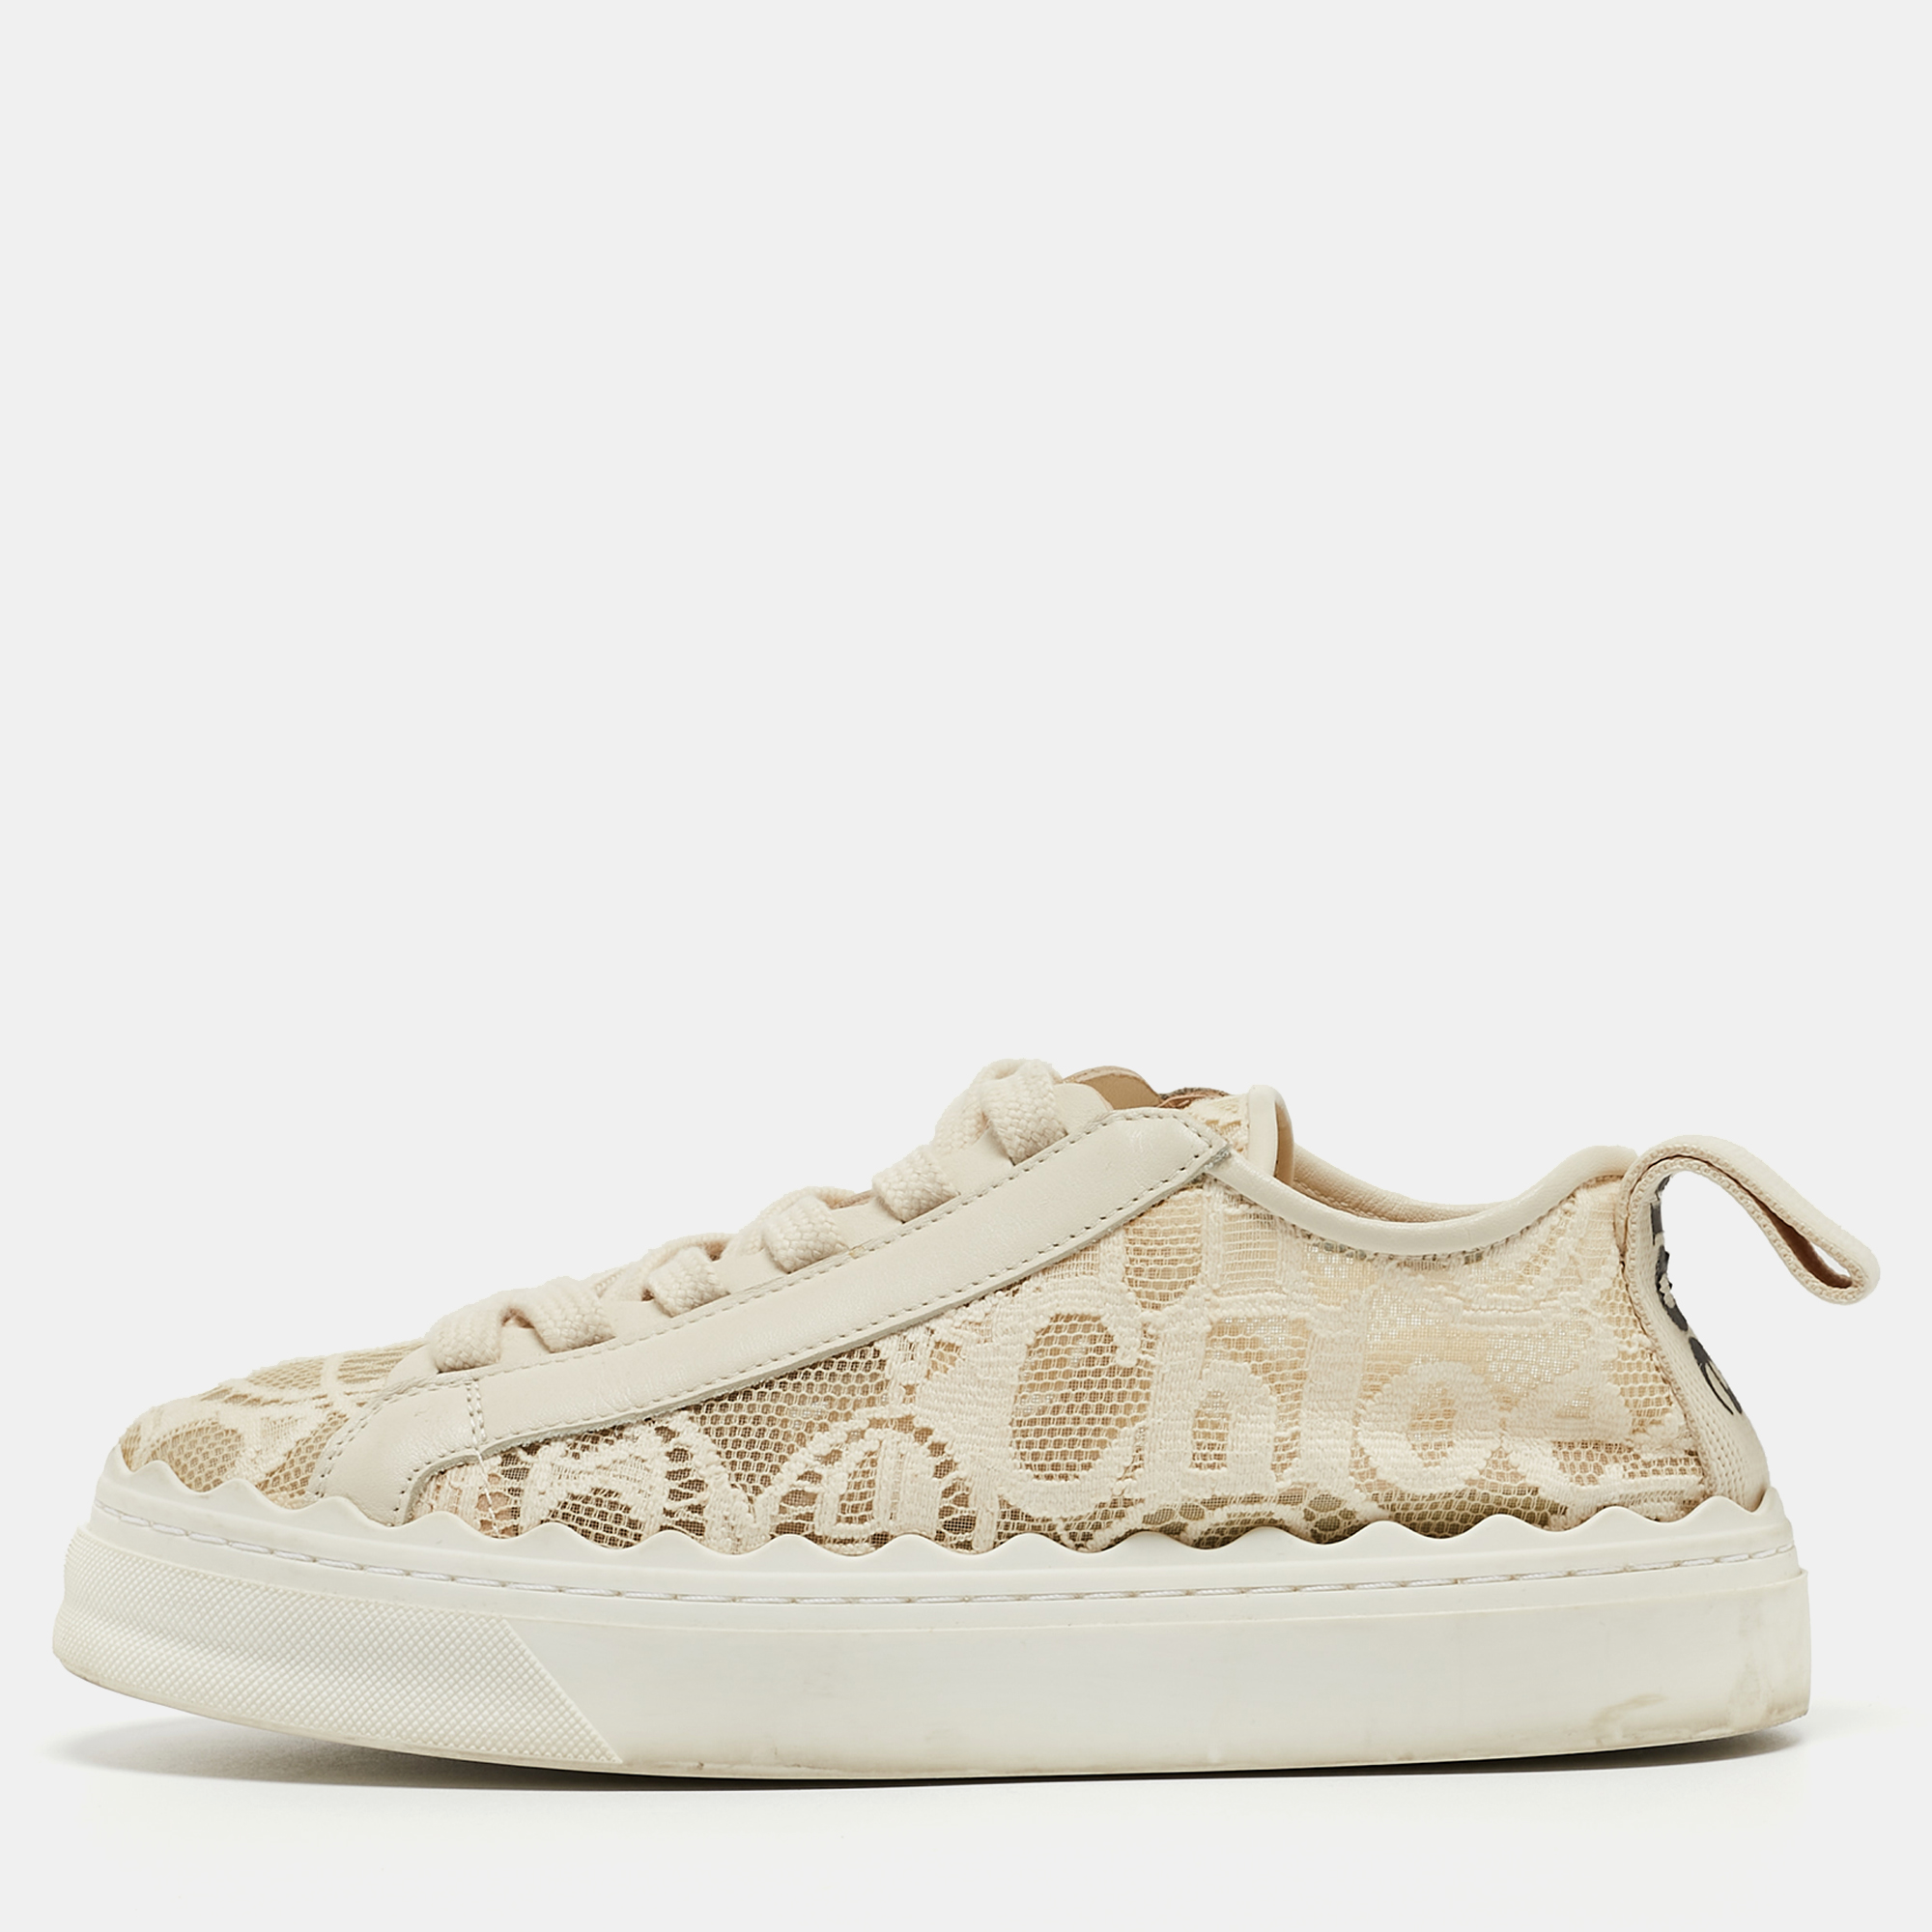 Chloe Cream Lace And Leather Lauren Lace Up Sneakers Size 36